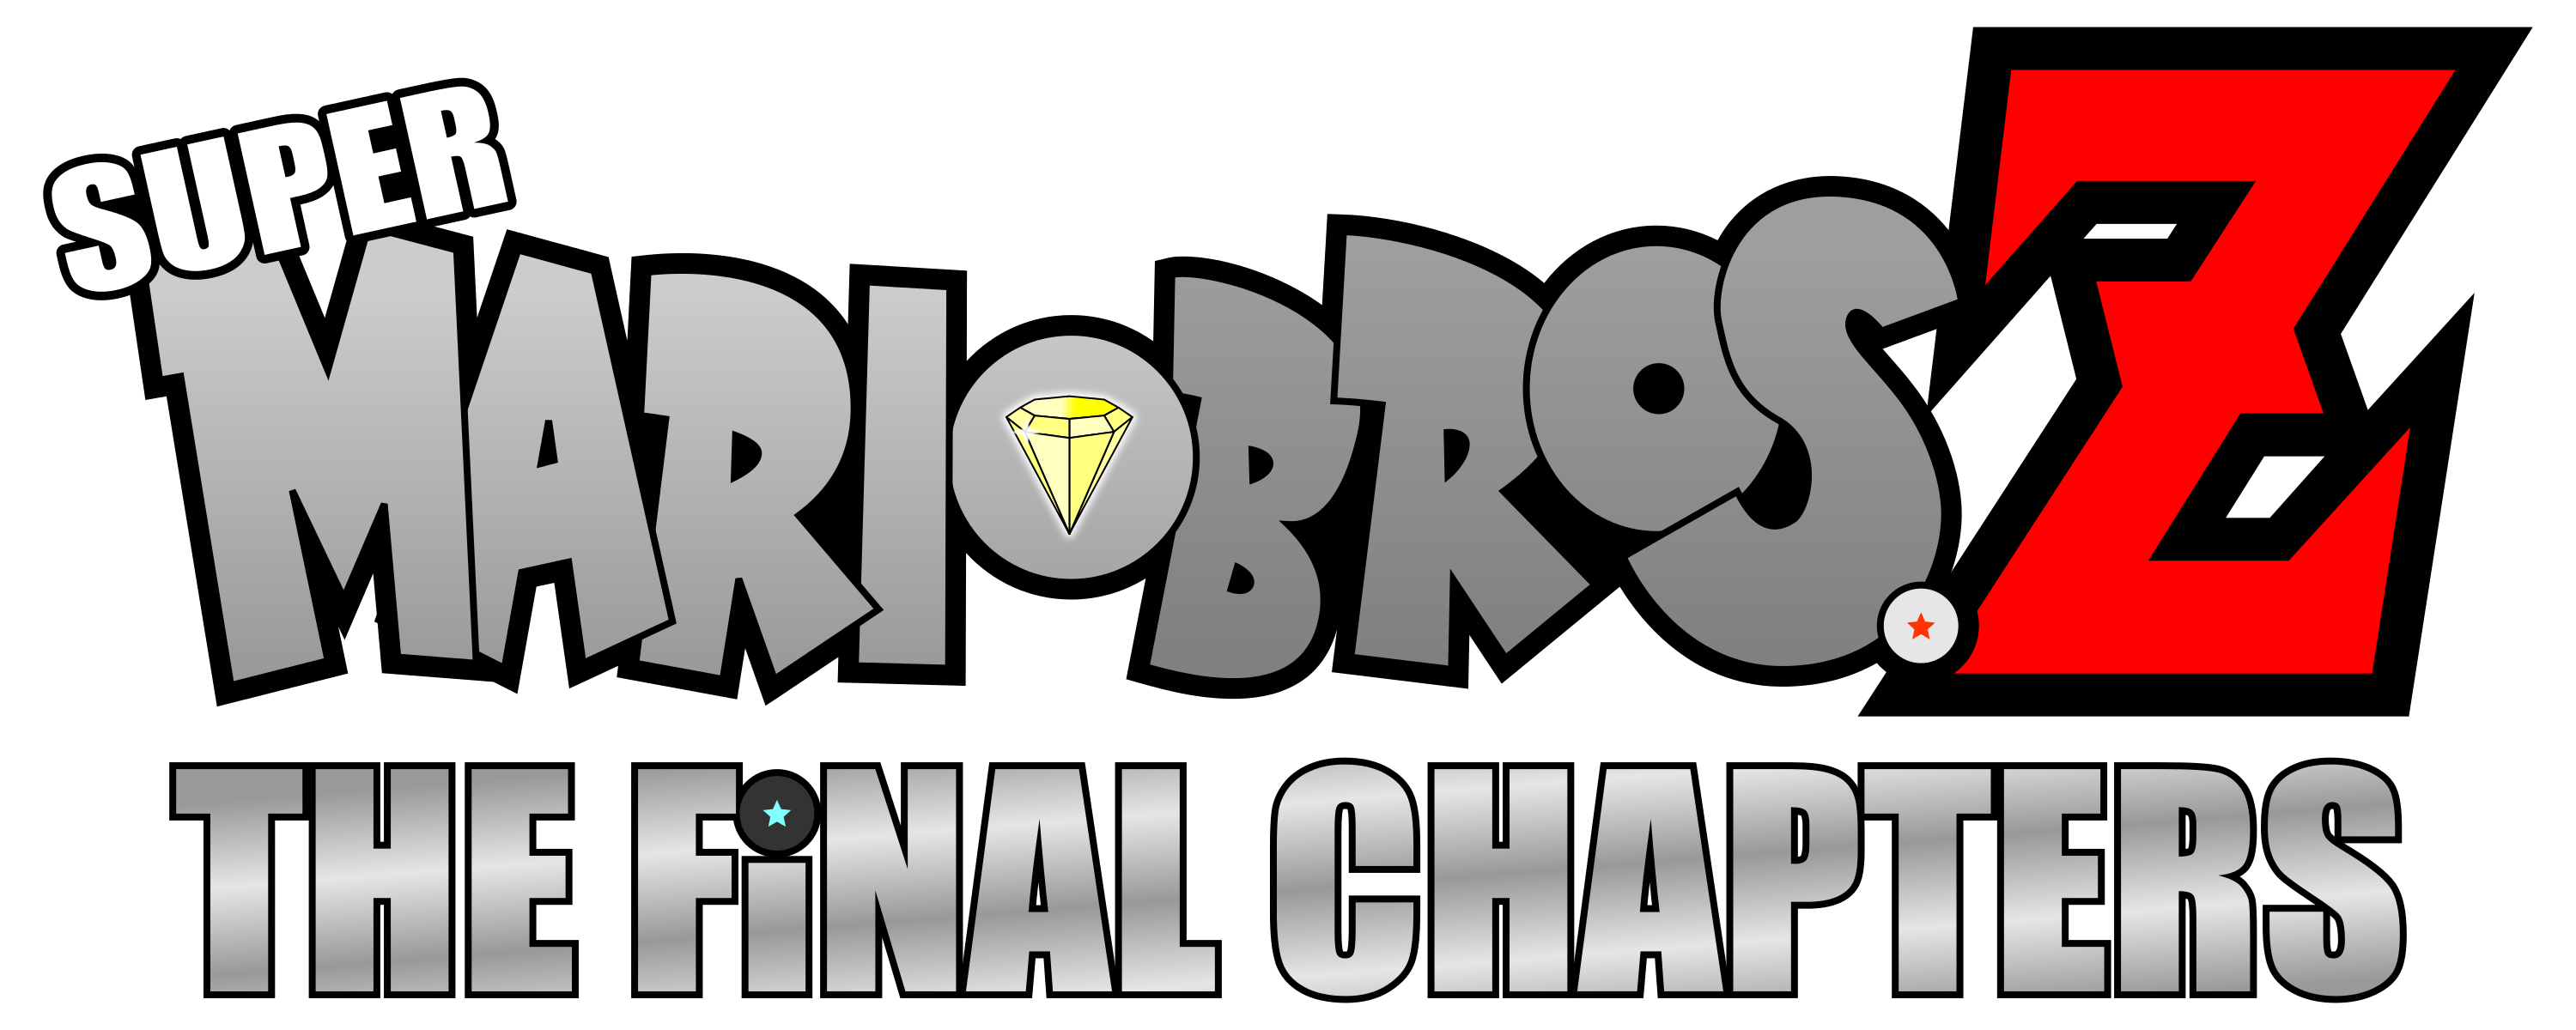 Chapters Logo - Super Mario Bros. Z Final Chapters (logo)